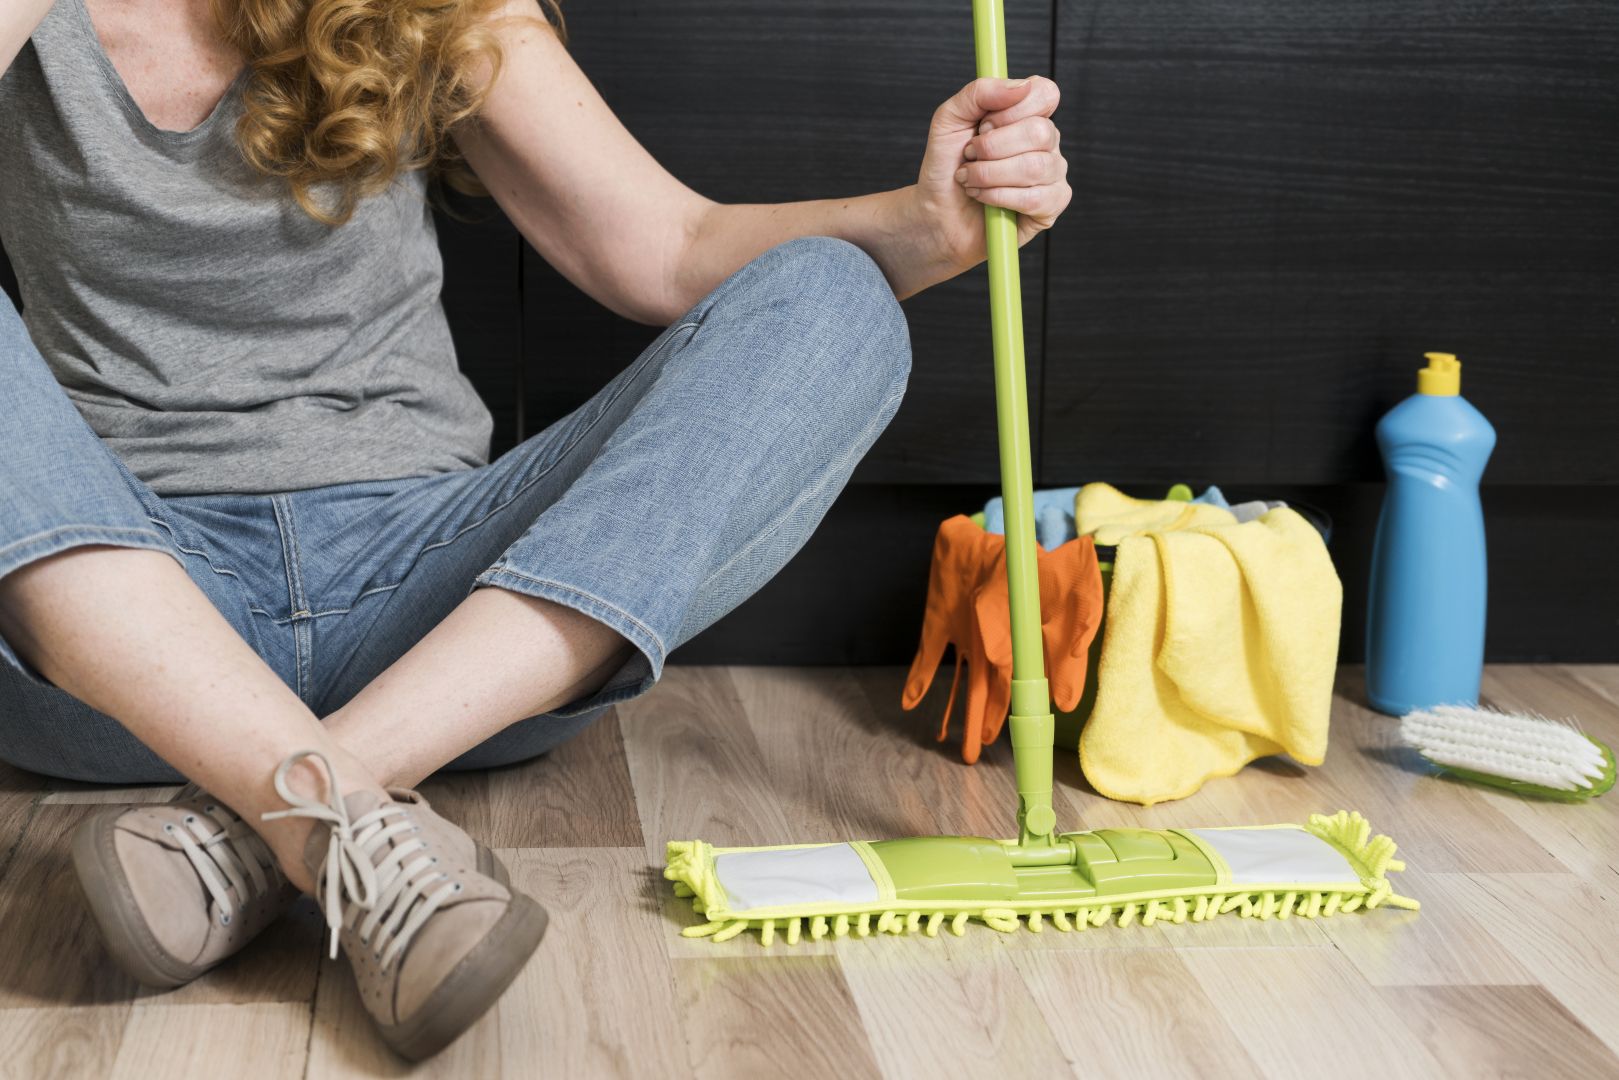 image of a women holing mop for home cleaninfg